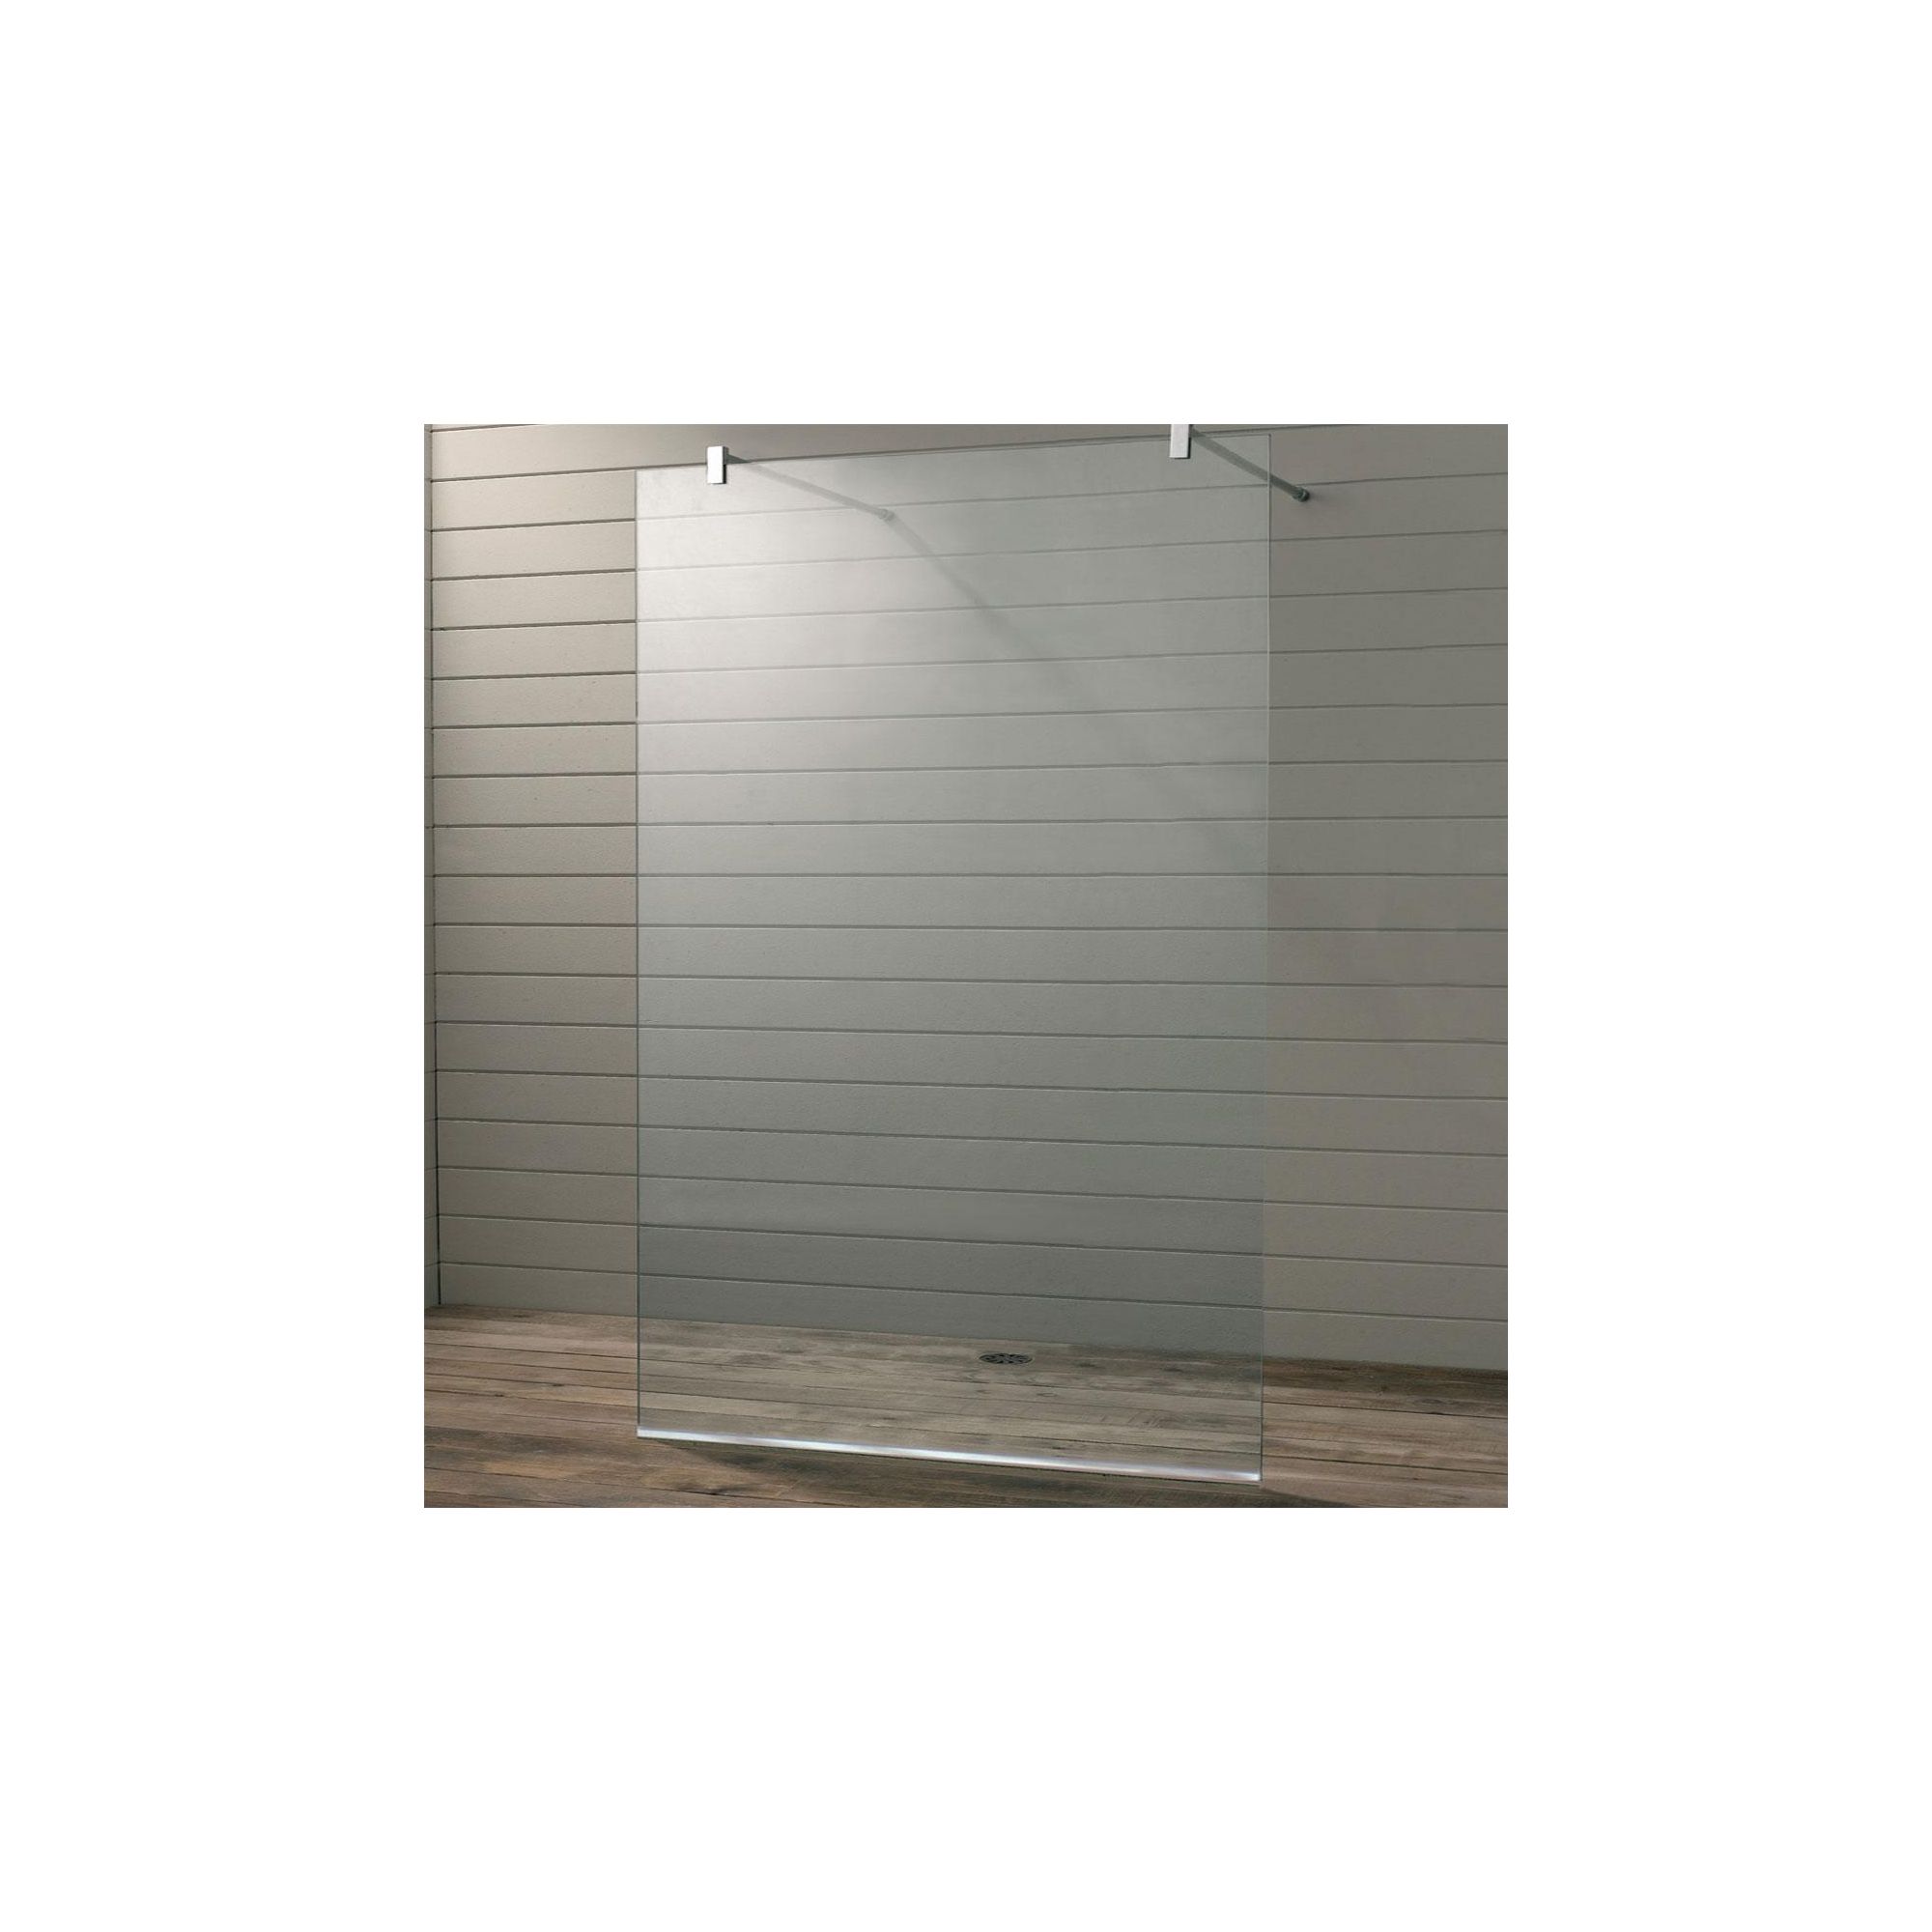 Duchy Premium Wet Room Glass Shower Panel, 1400mm Wide, 10mm Glass at Tesco Direct